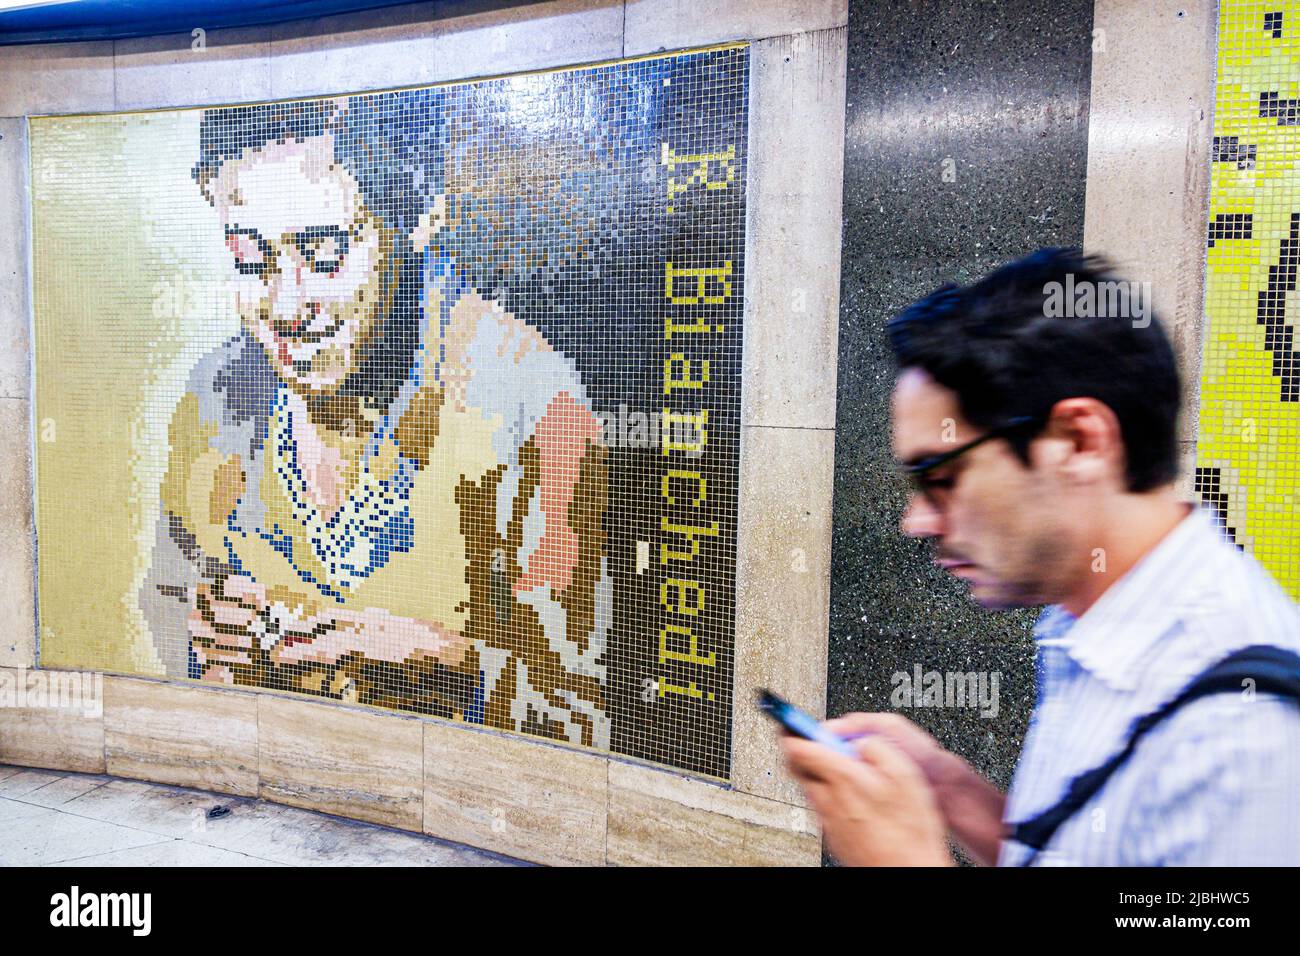 Buenos Aires Argentina,Subte subway Callao,station,tile mural,Remo Bianchedi,man male,checking looking reading texting messaging smartphone Hispanic Stock Photo